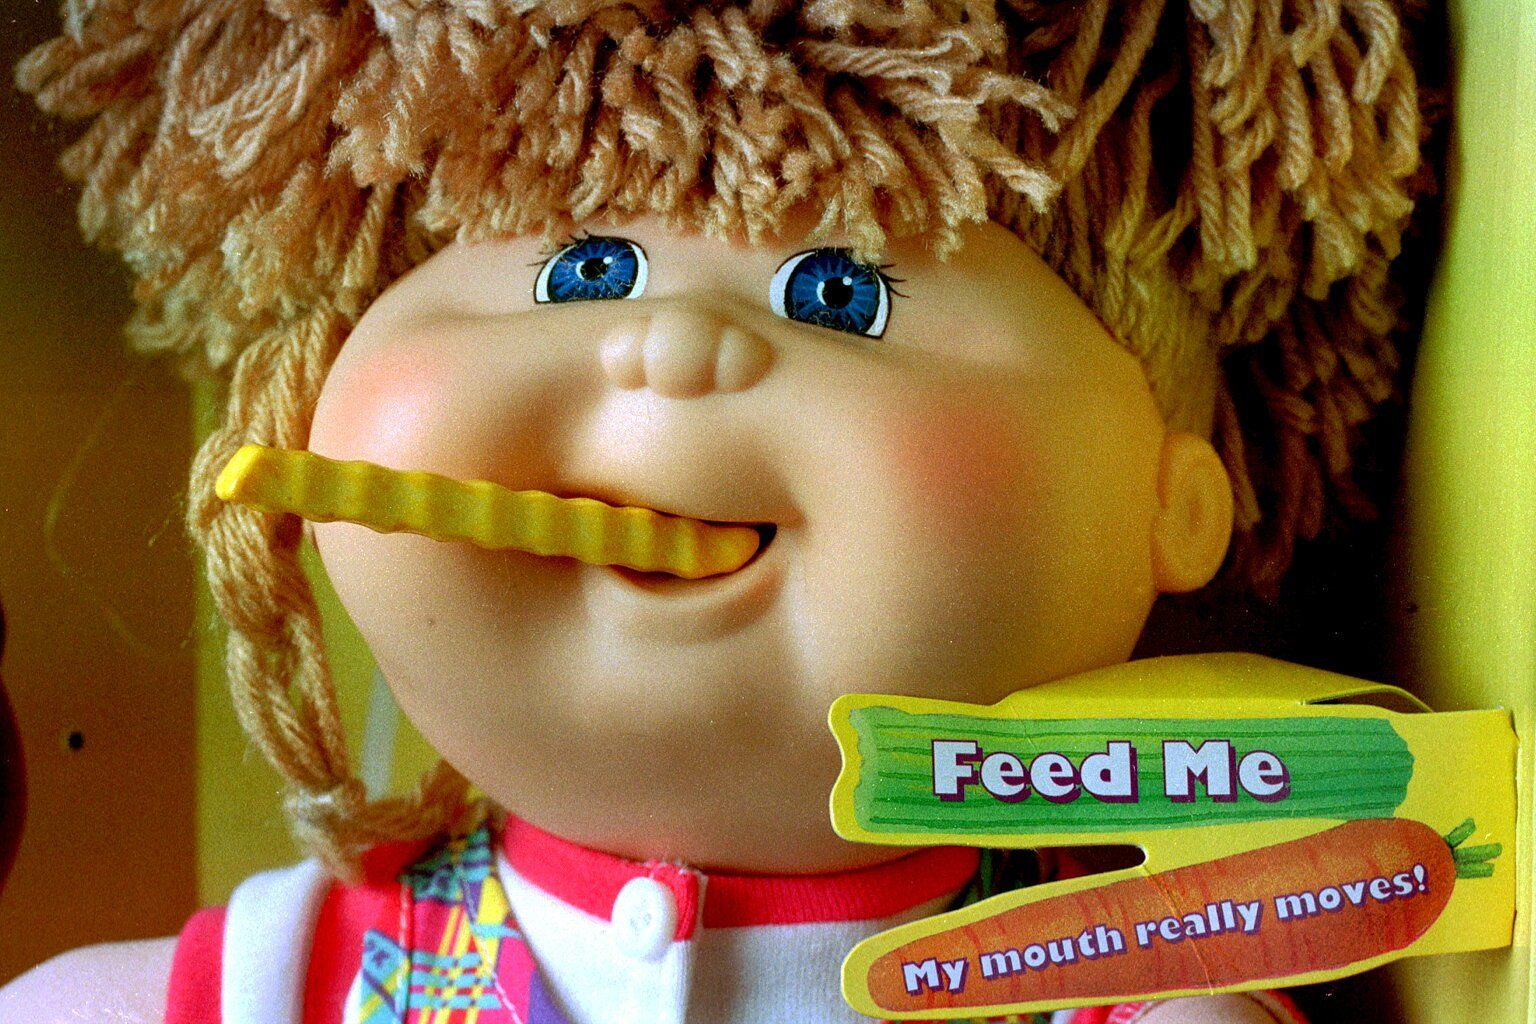 Snacktime Cabbage Patch Kid